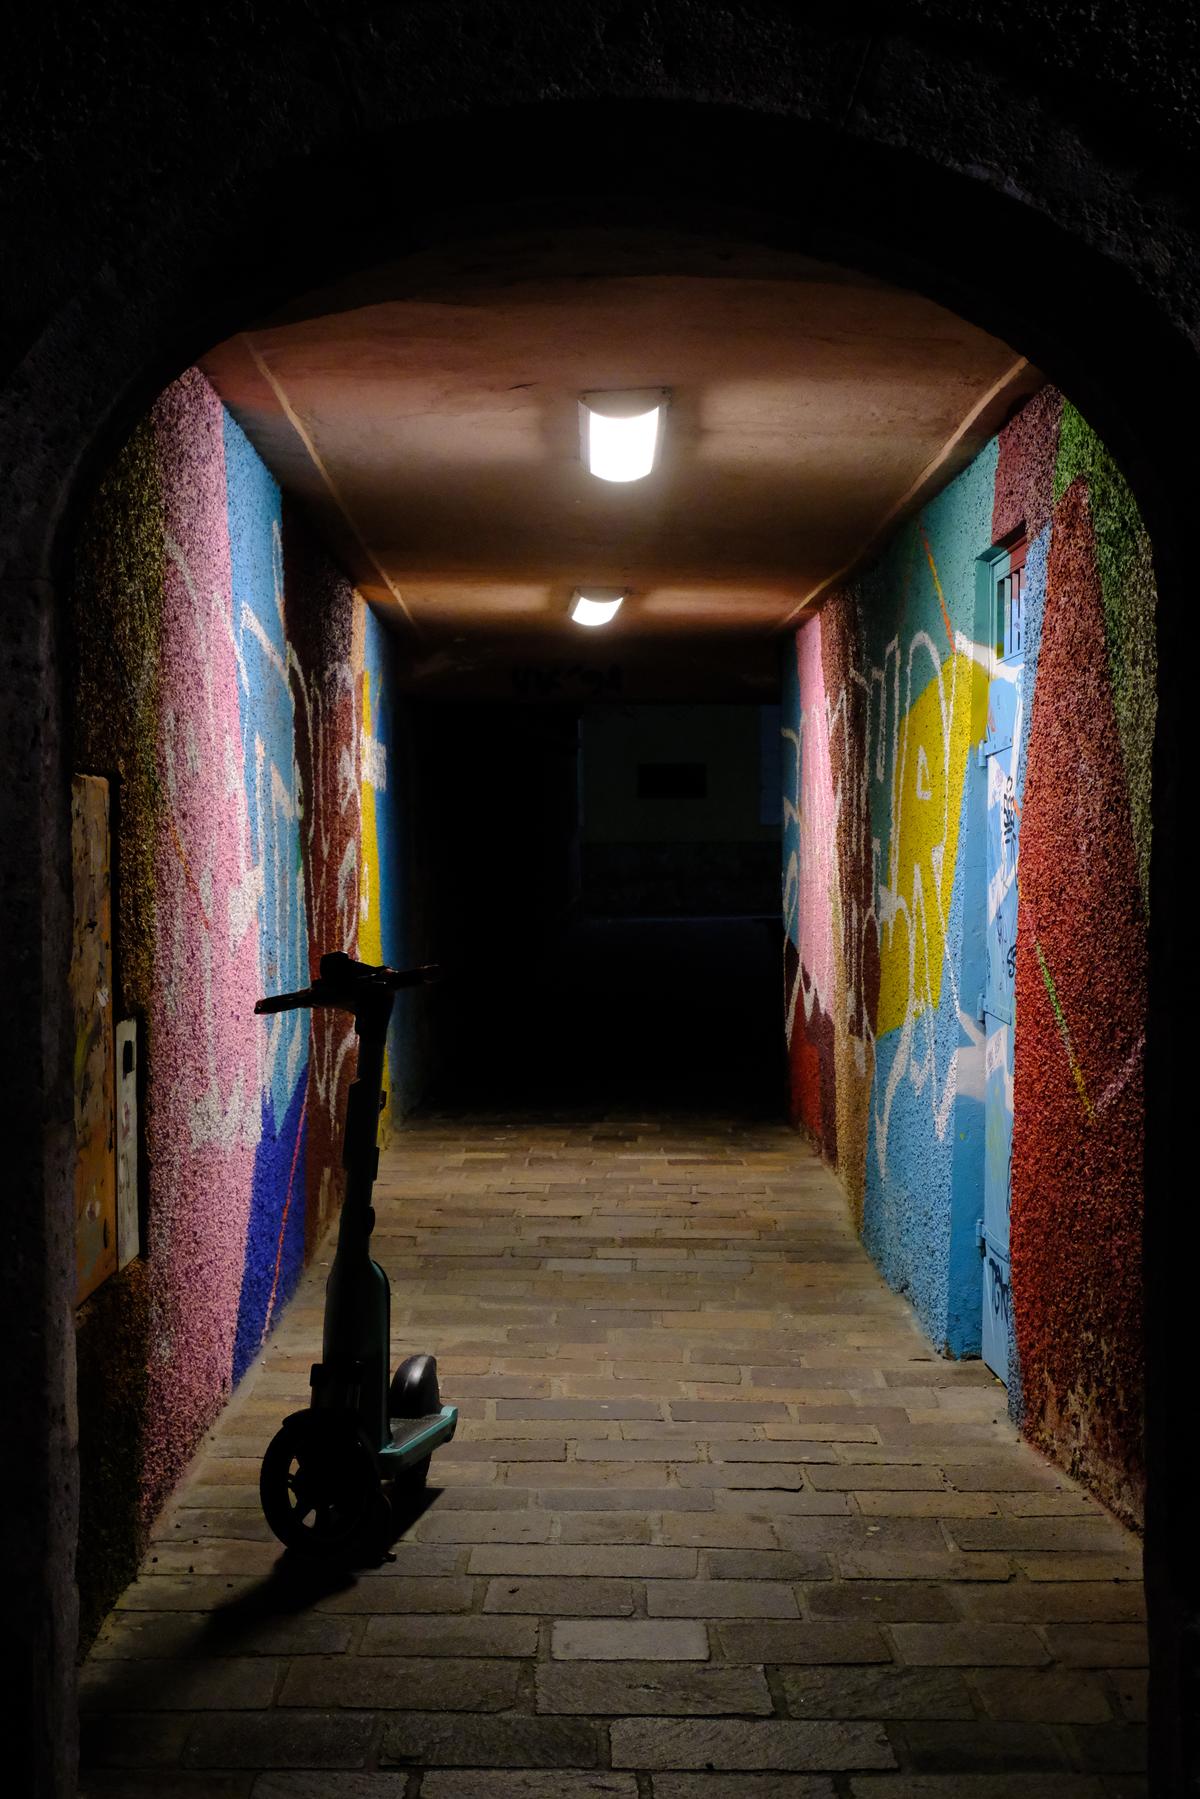 An electric scooter sits in shadow in a brightly painted tunnel at night. Innsbruck, Austria